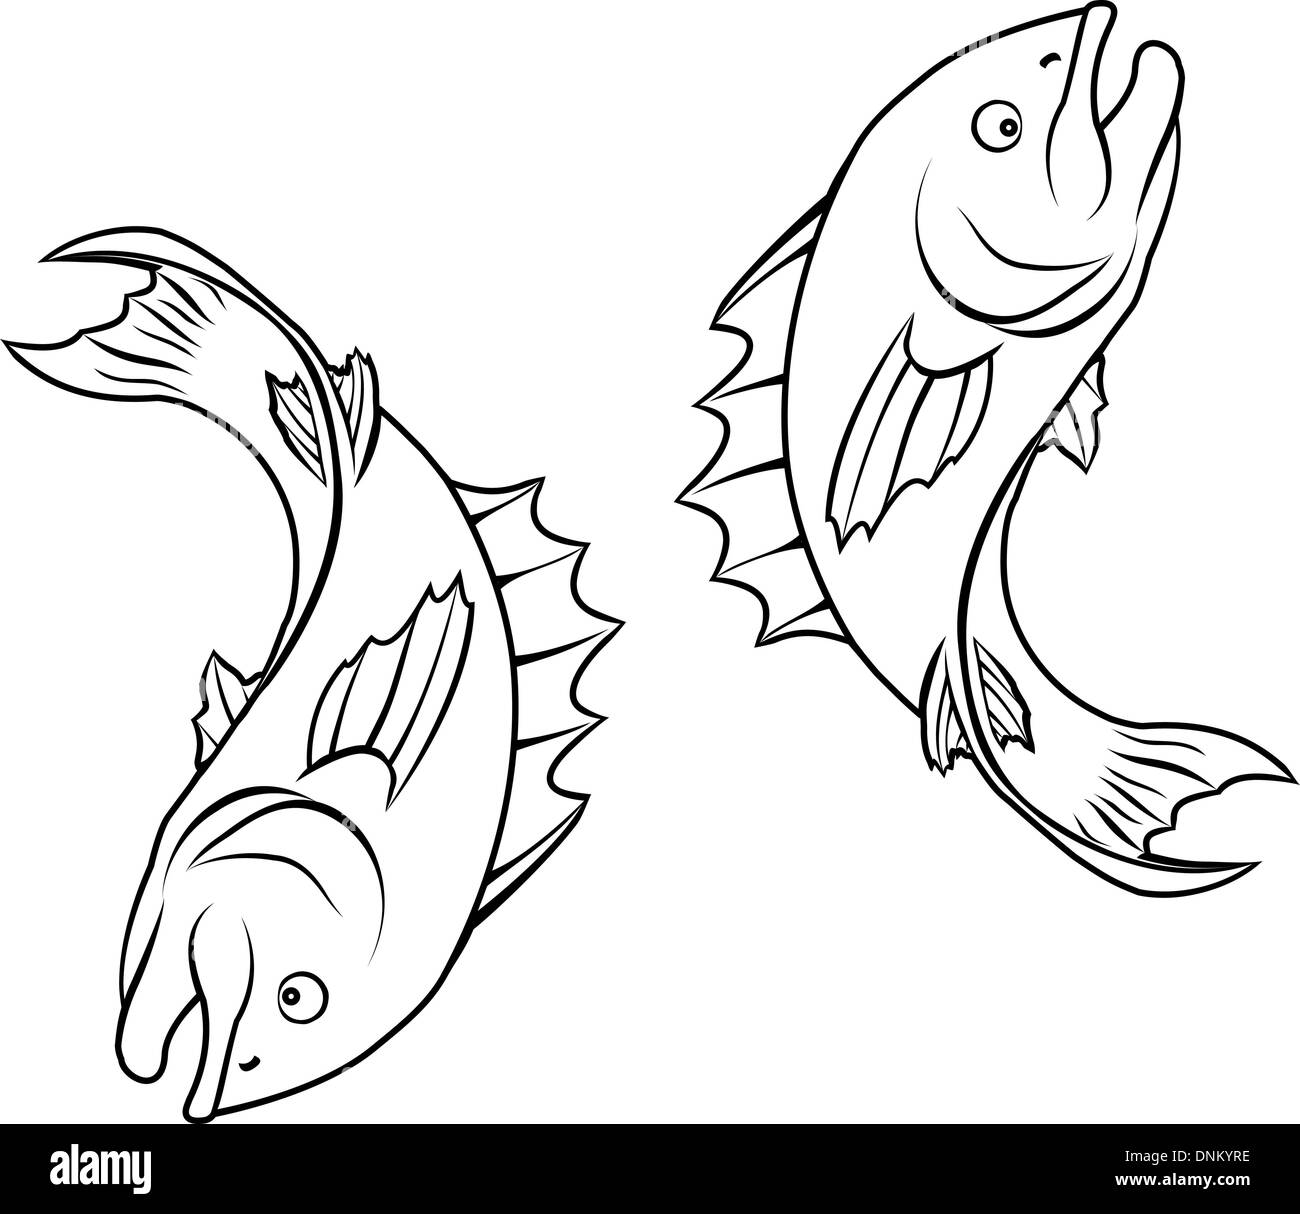 An illustration of stylised fish forming a circle perhaps a fish tattoo Stock Vector